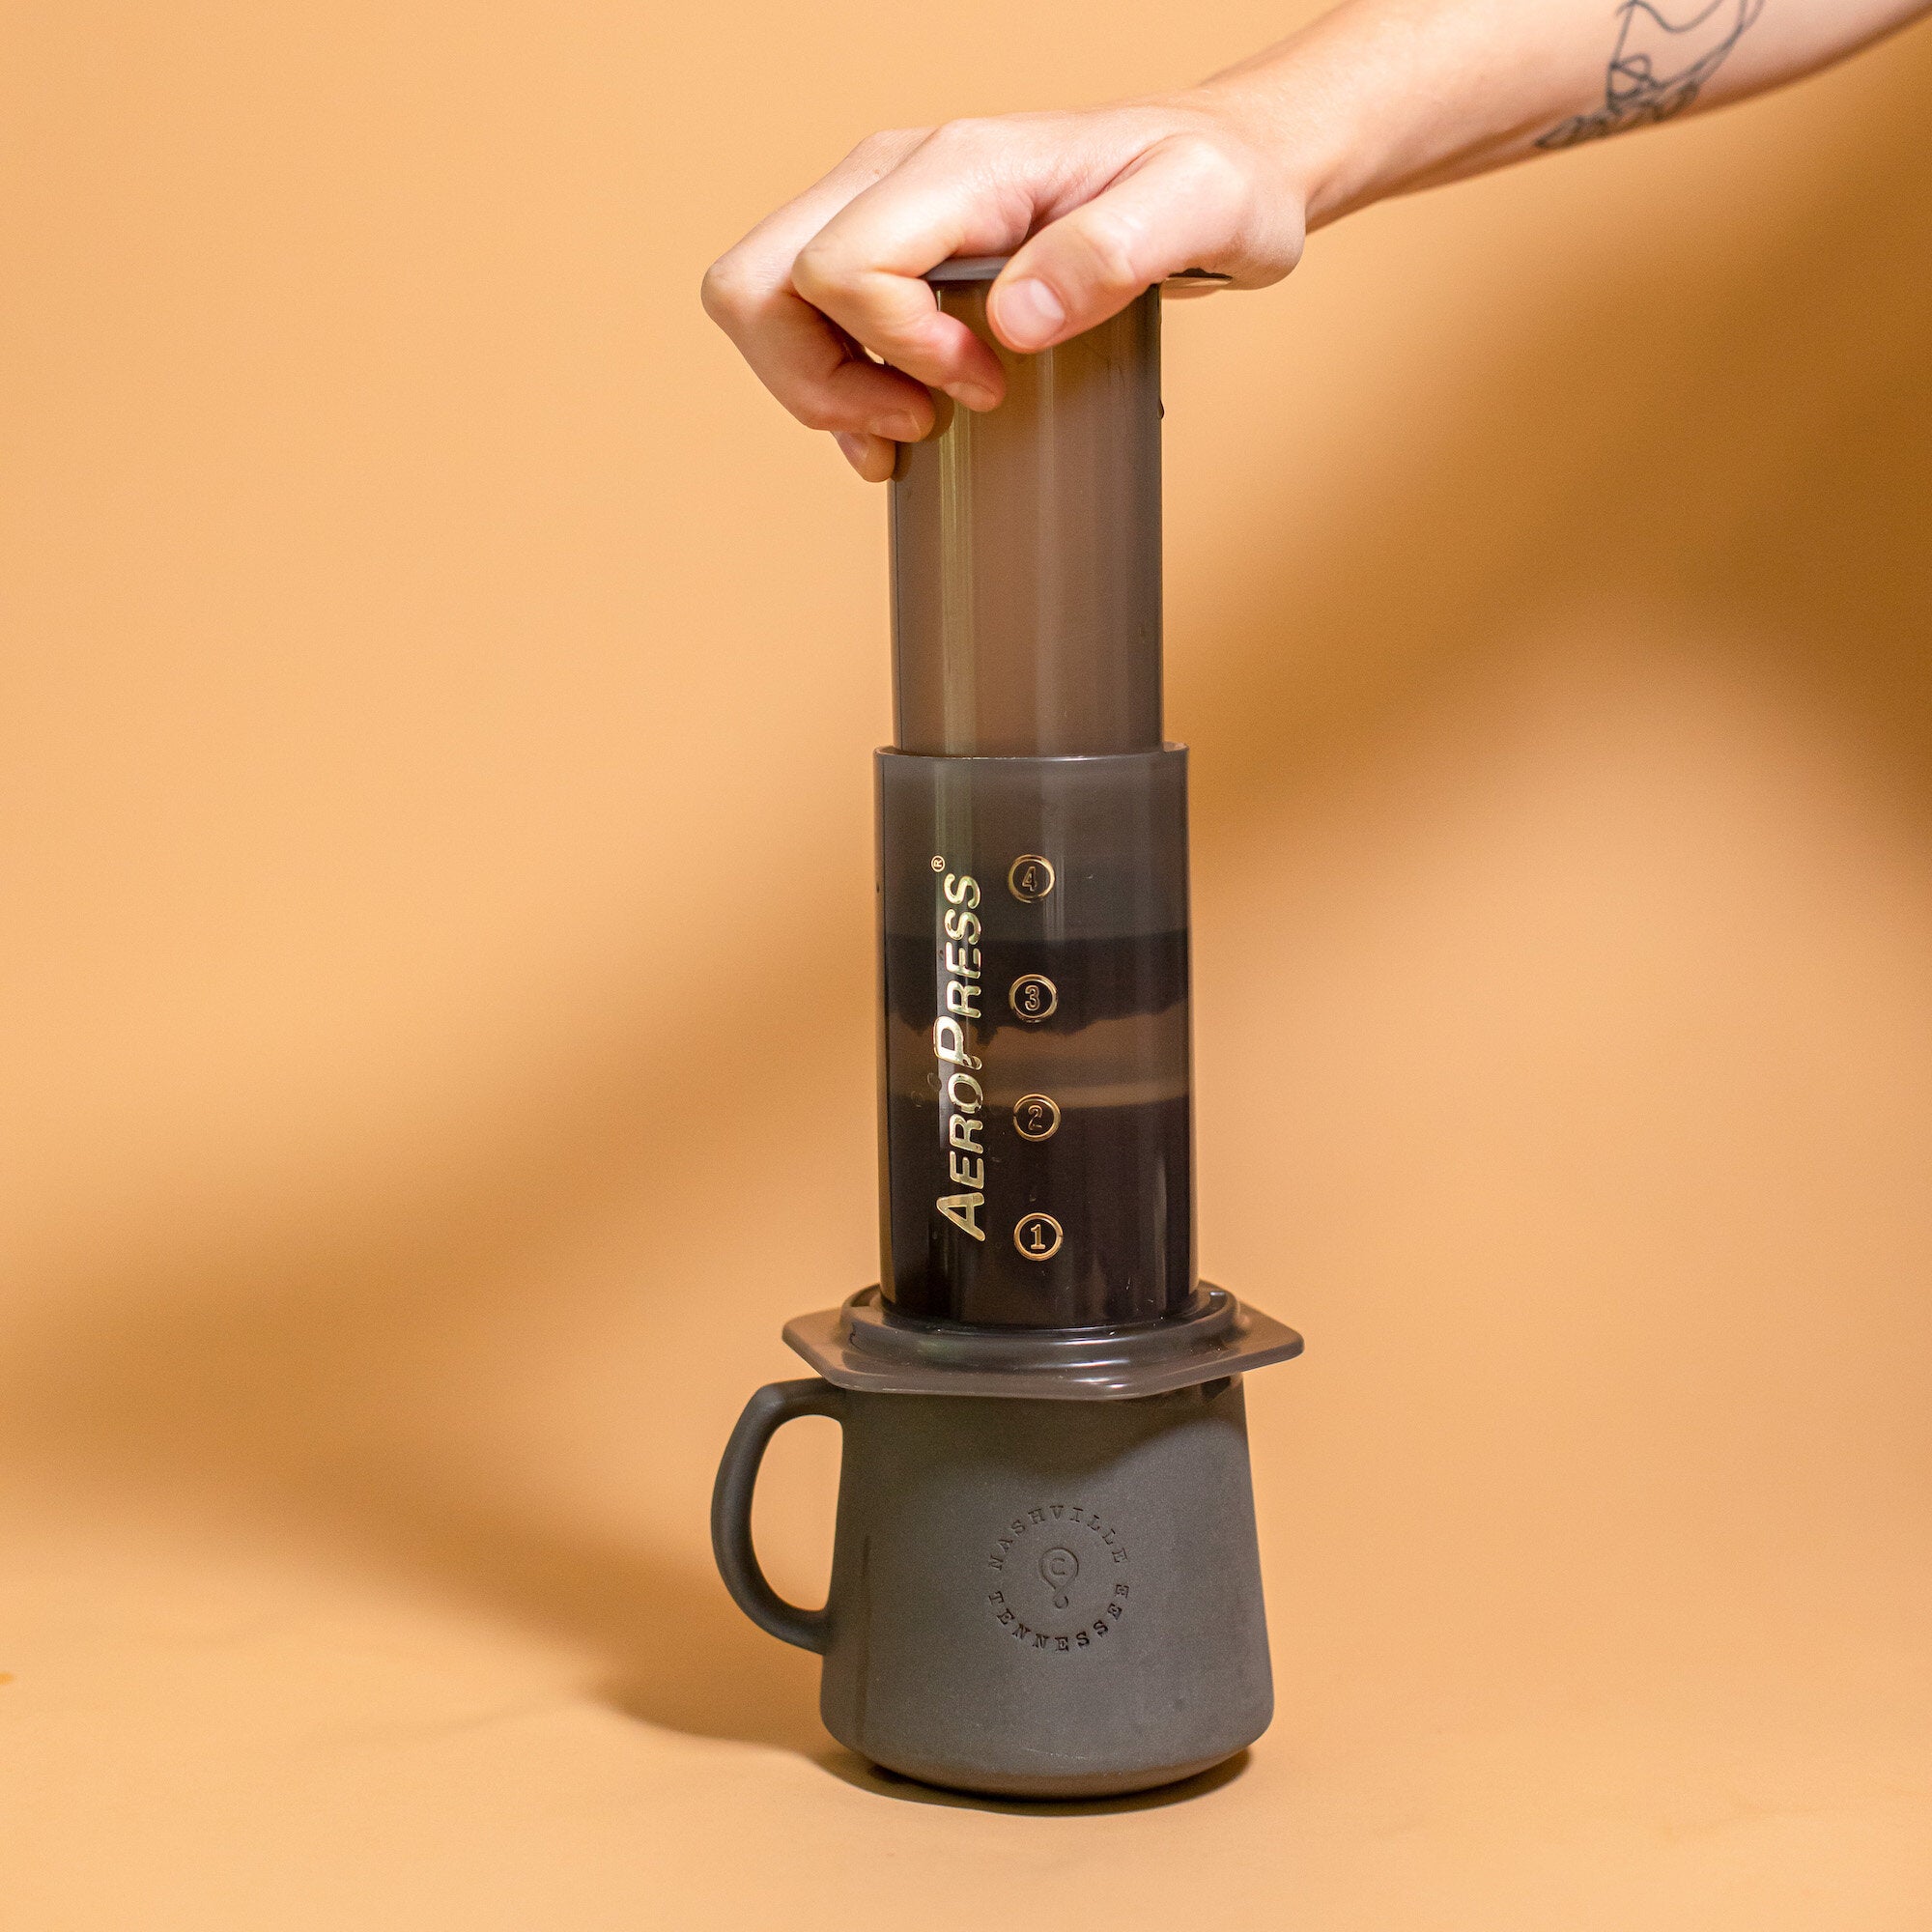 Aeropress SUPERSIZED: Brew Two Cups at the Same Time 